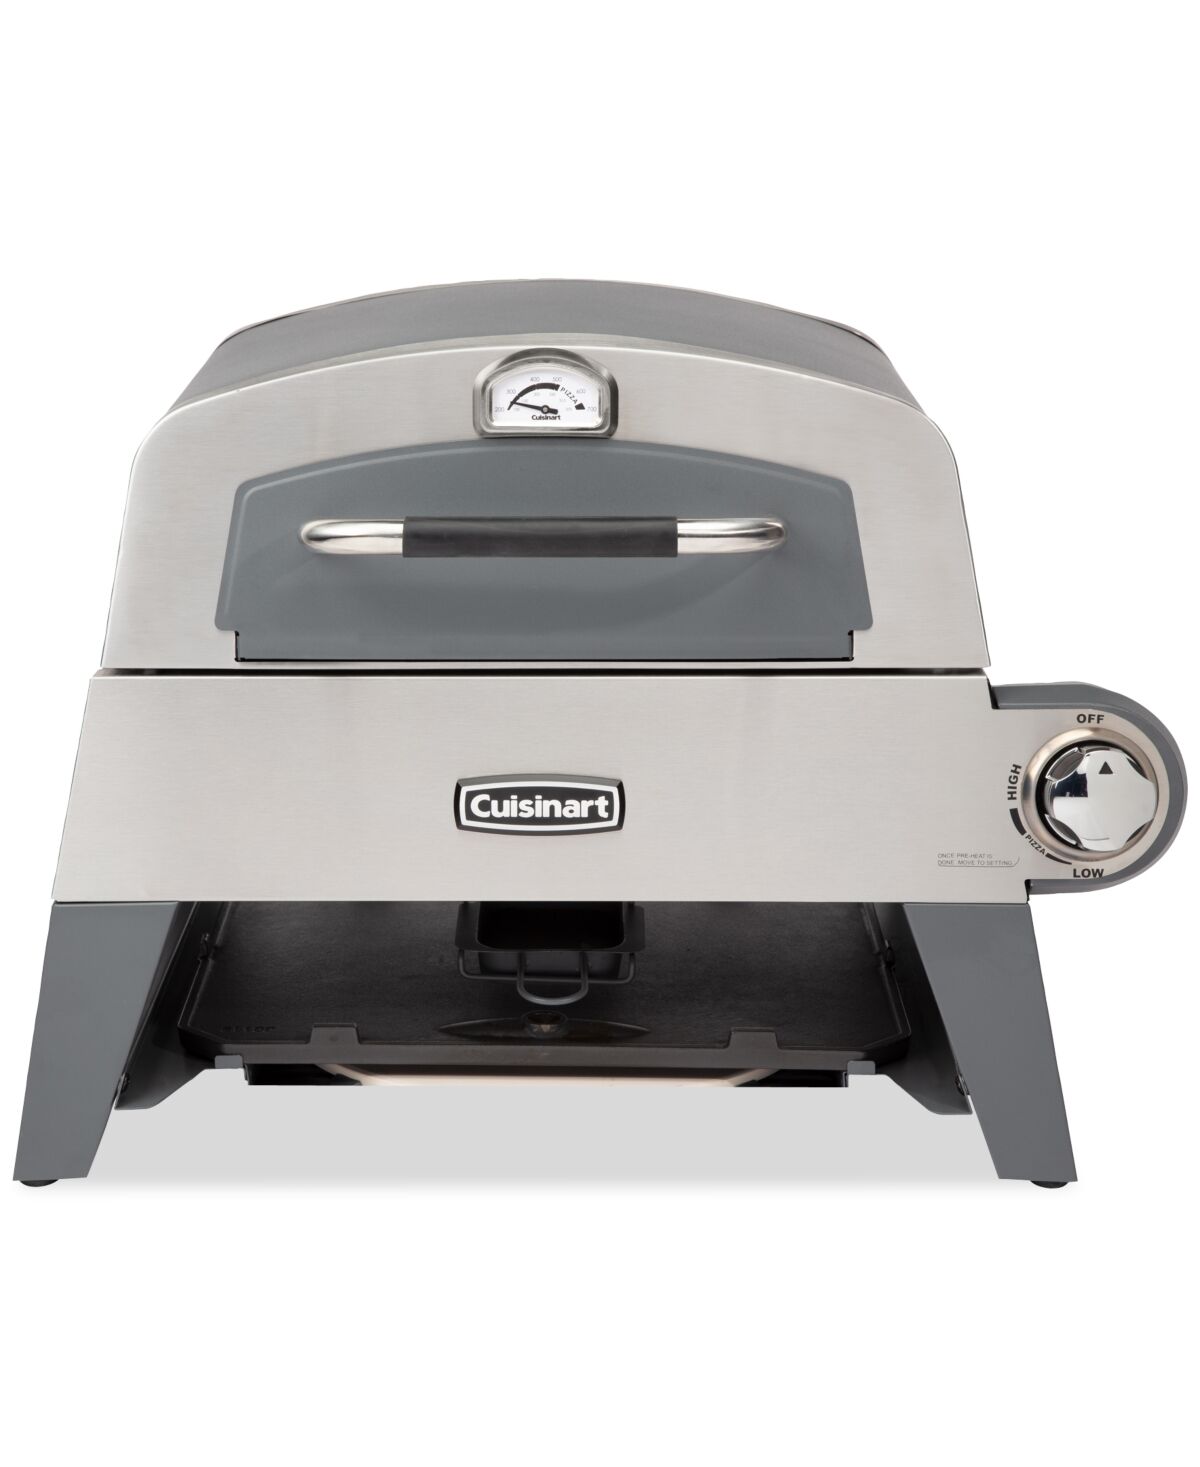 Cuisinart 3-in-1 Pizza Oven, Griddle, & Cast Iron Grill - Stainless Steel/grey